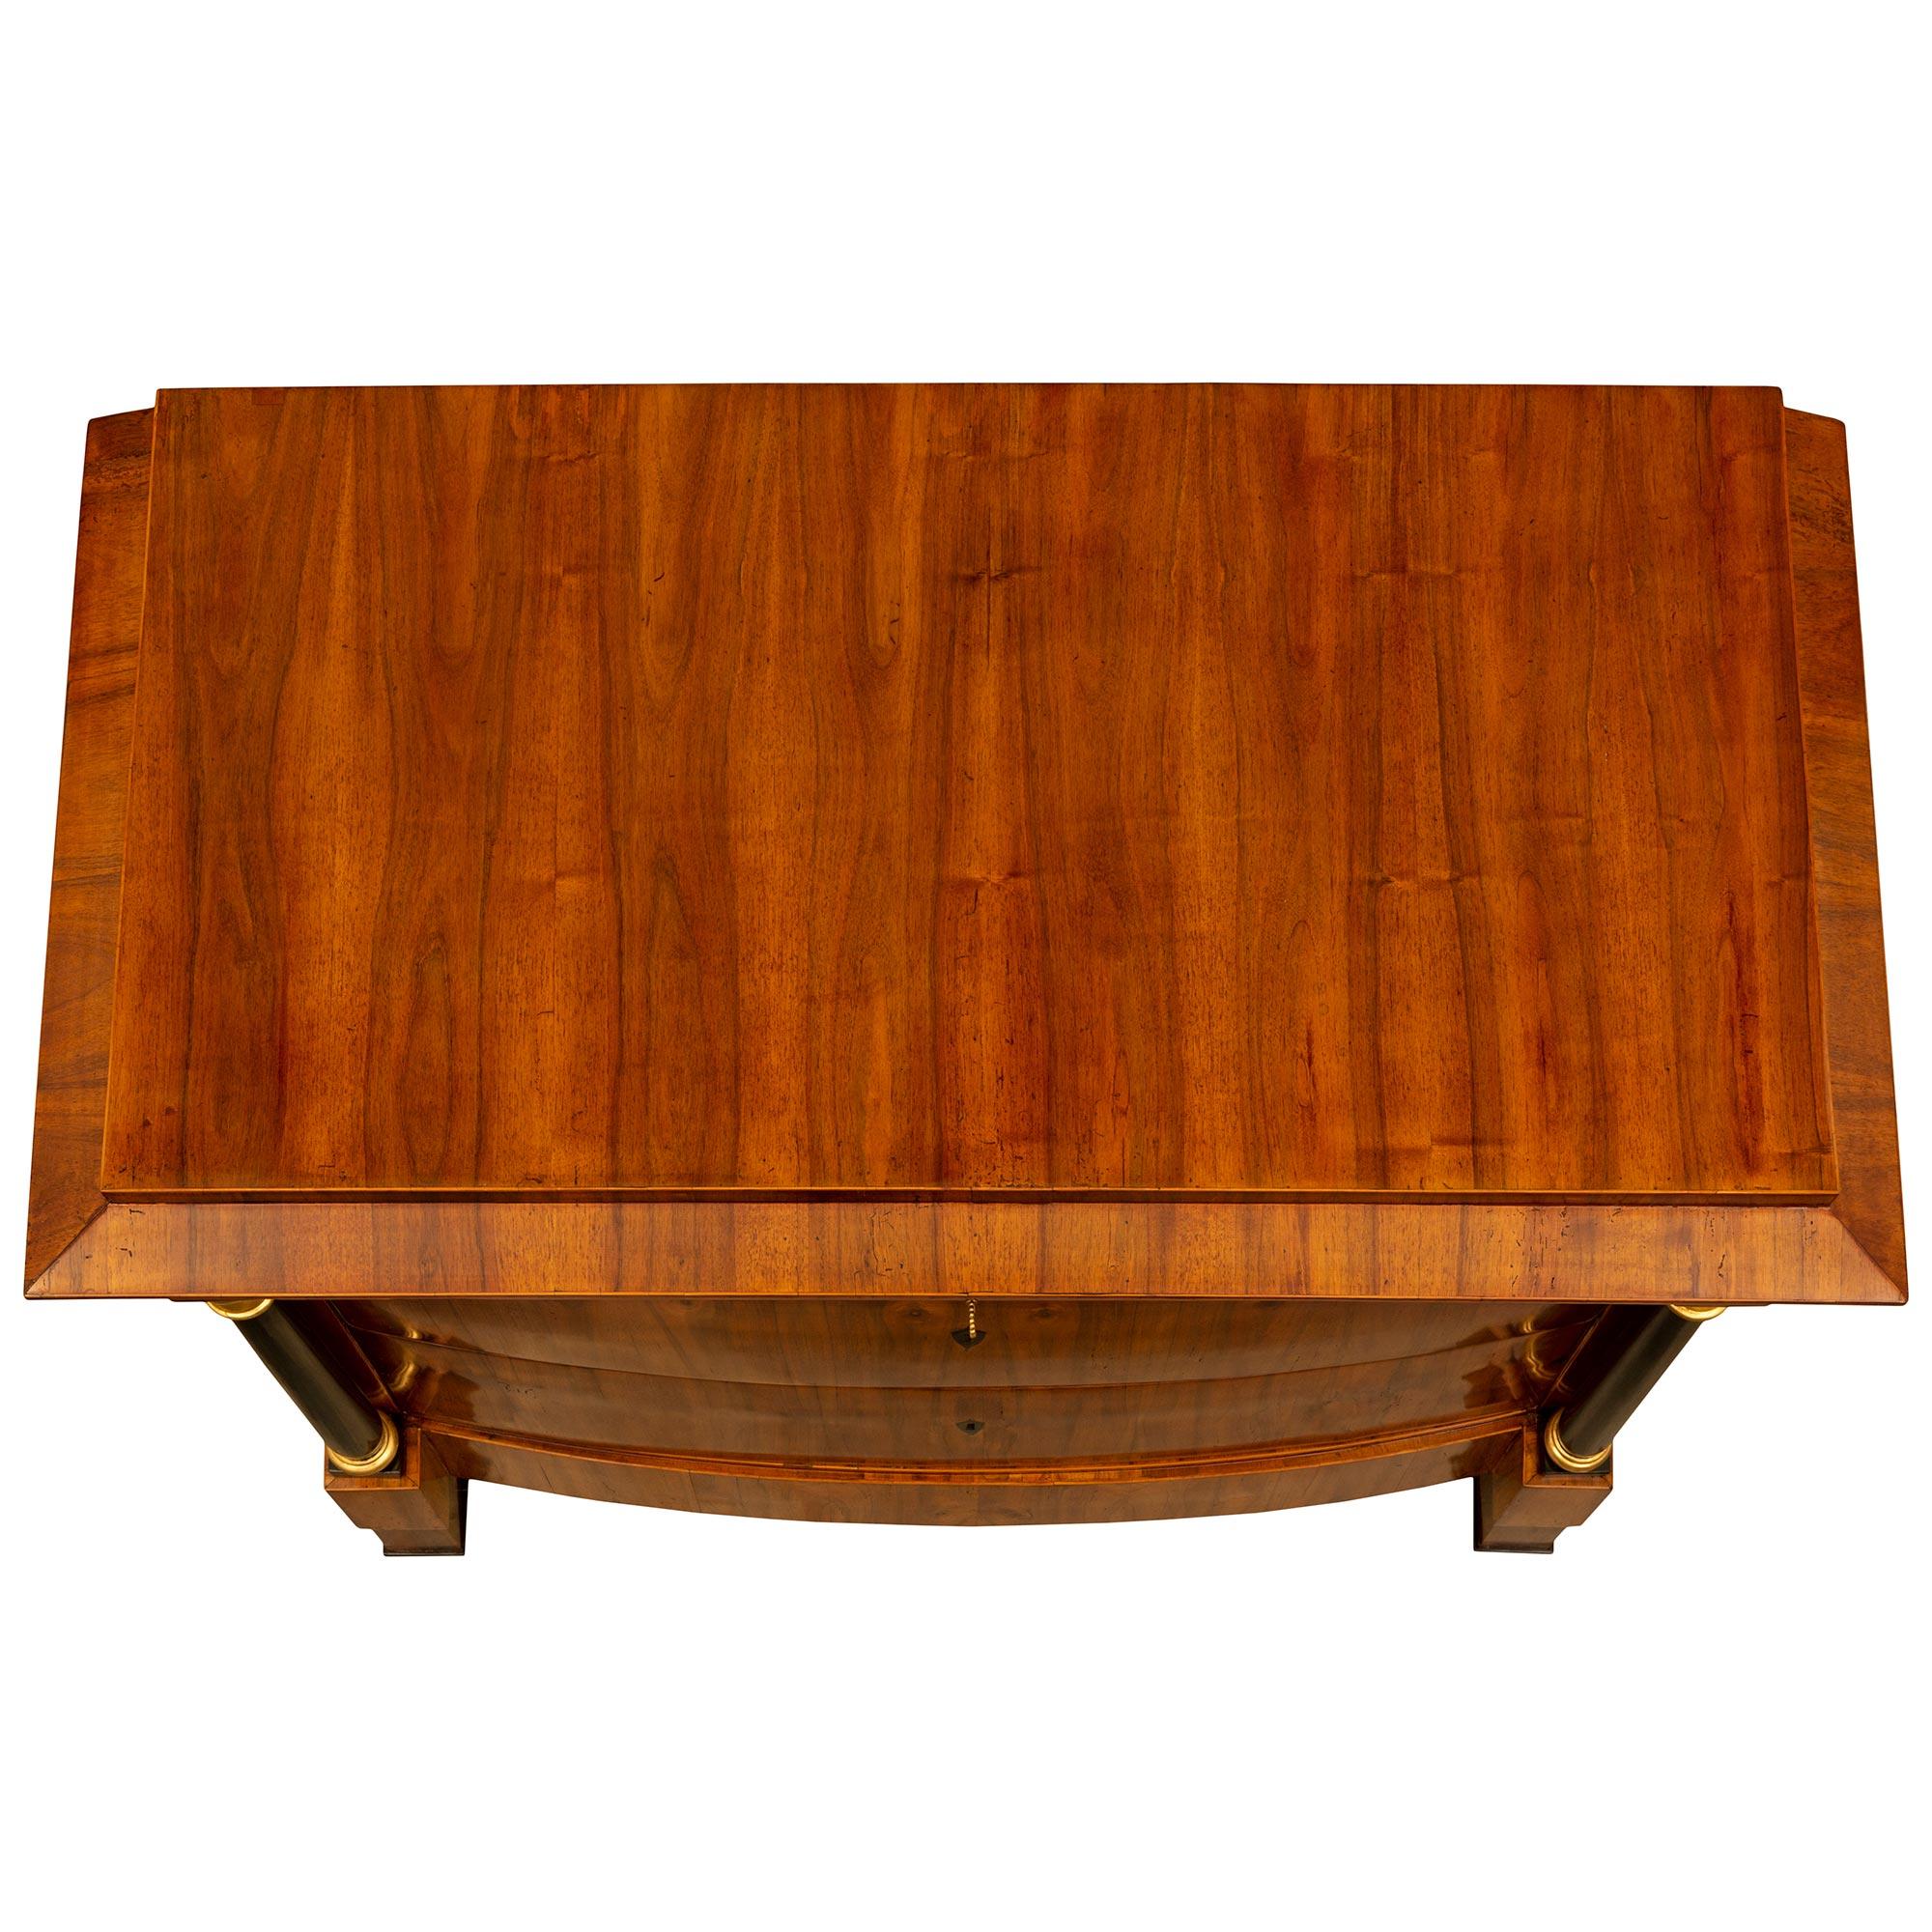 Continental 19th Century Biedermeier Period Walnut & Fruitwood Commode For Sale 4